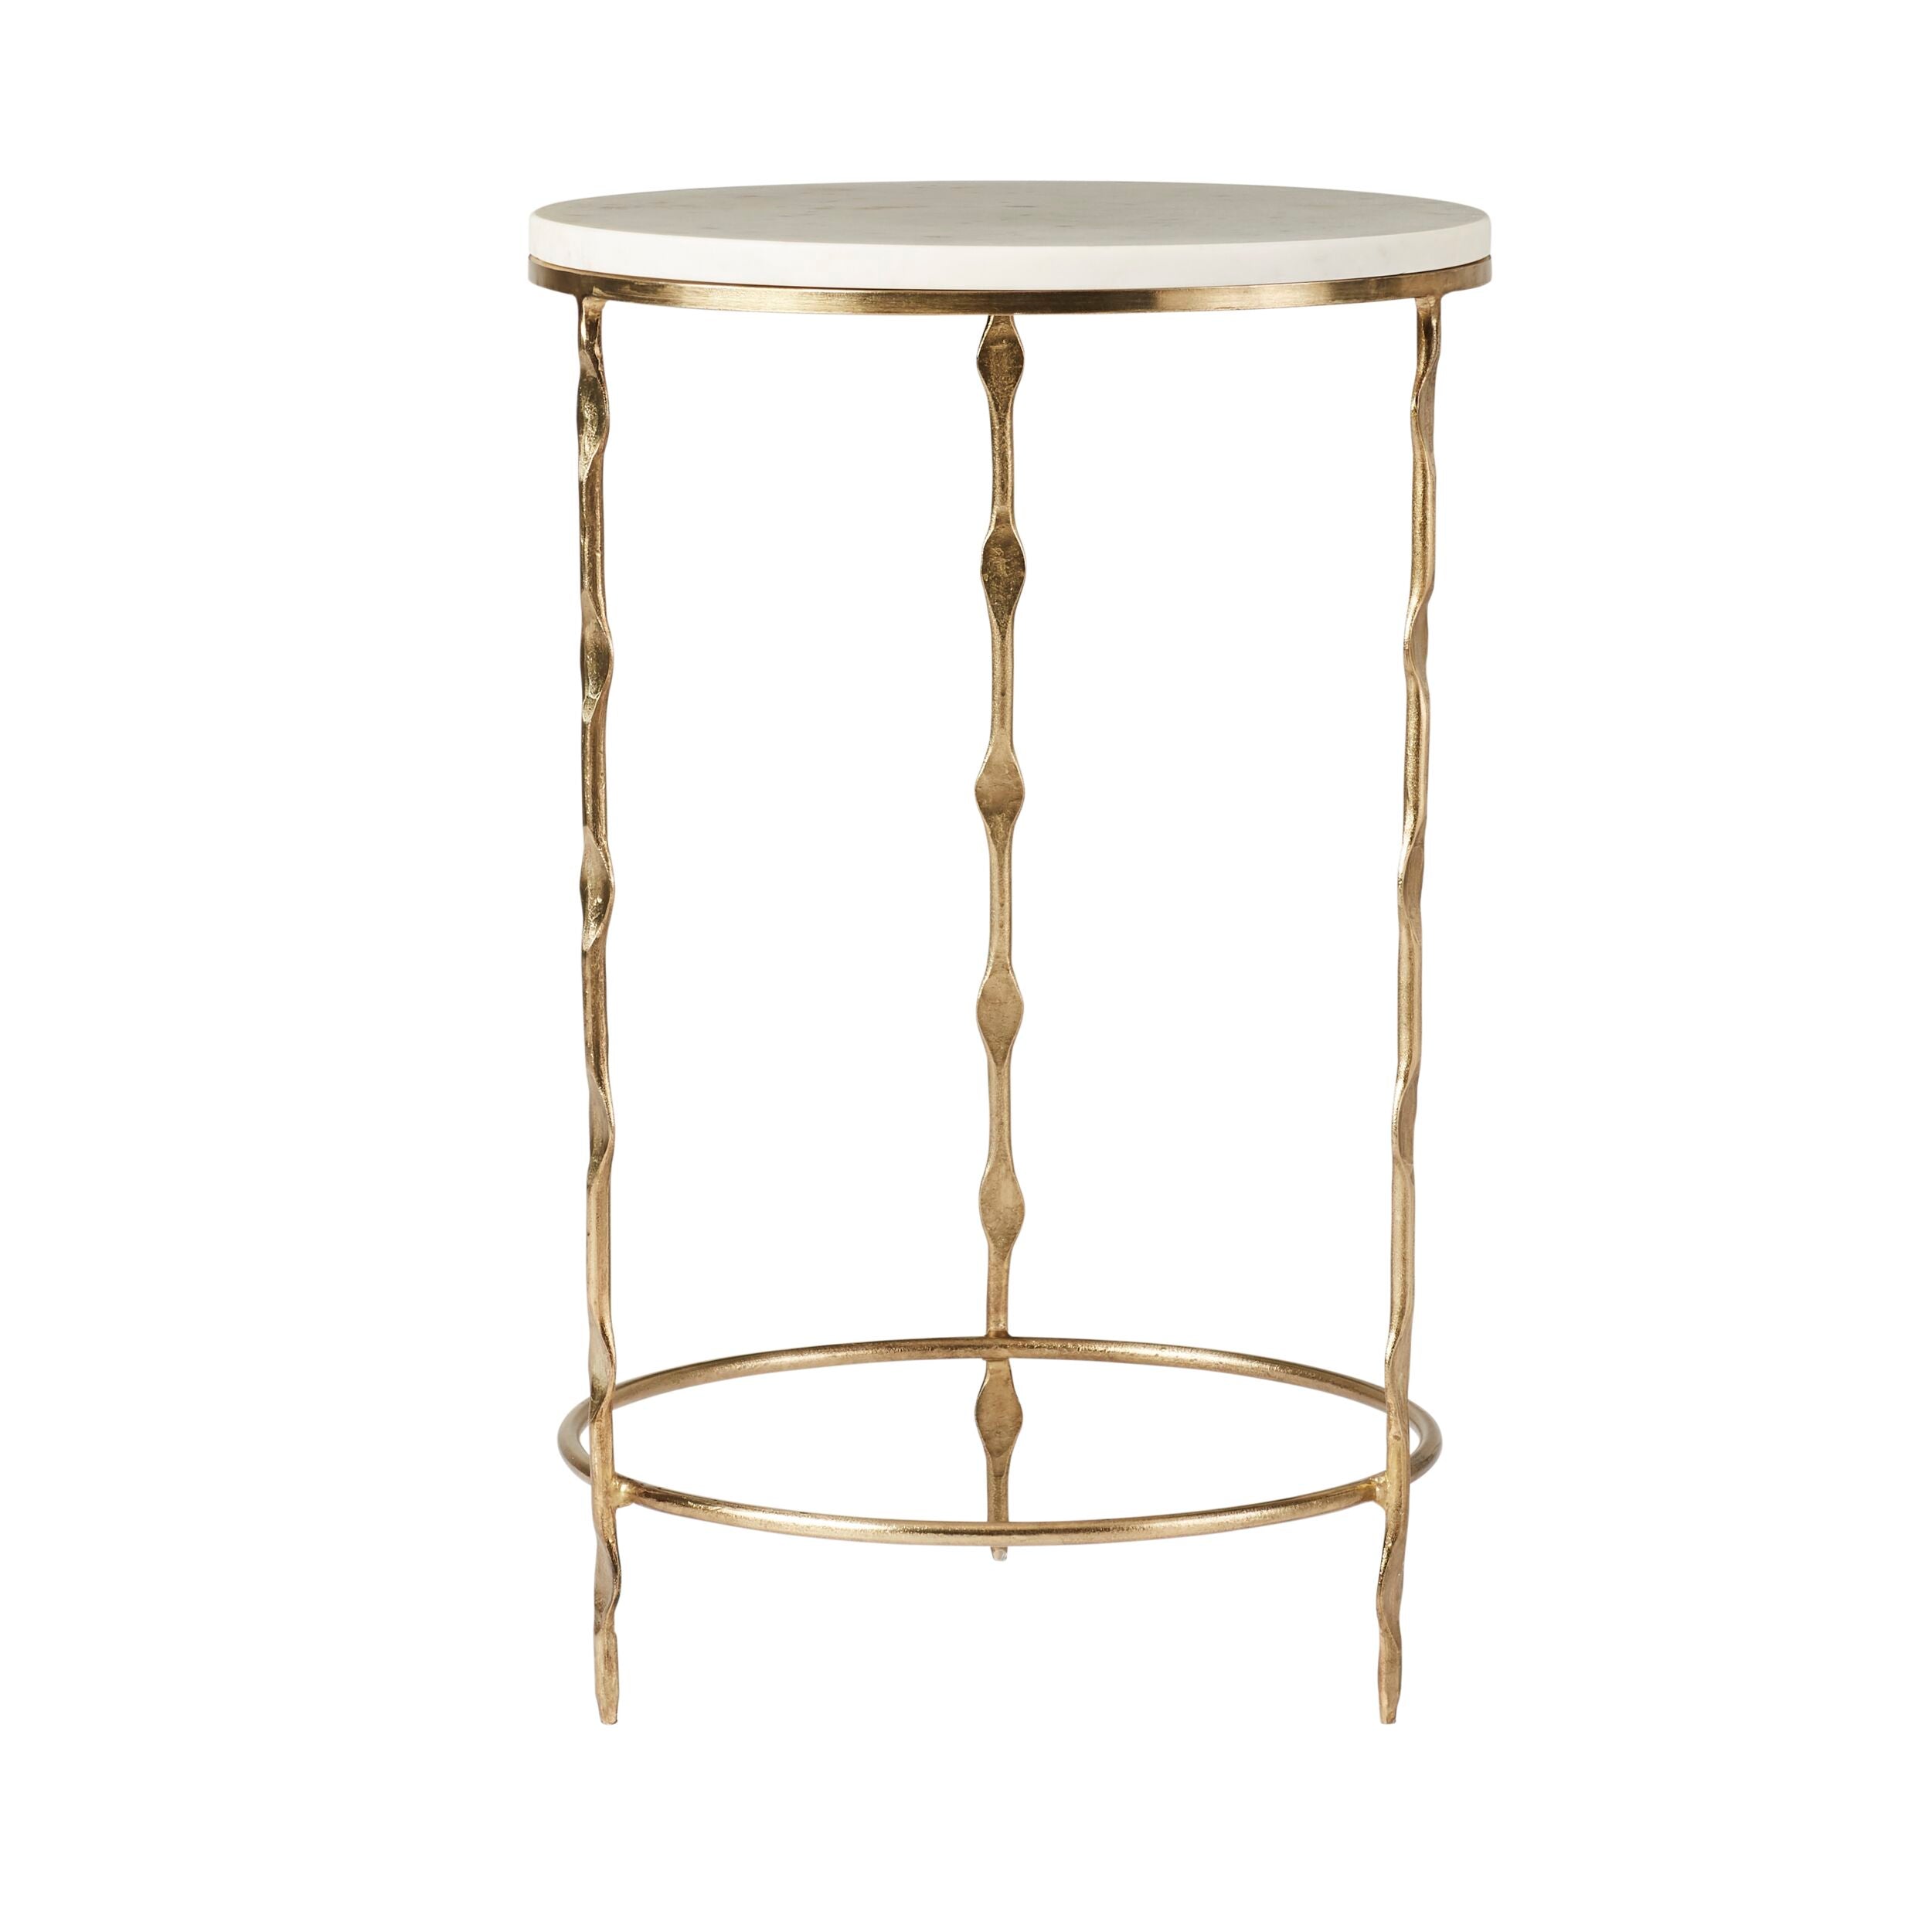 Iron Round Side Table With Marble Top 60cm